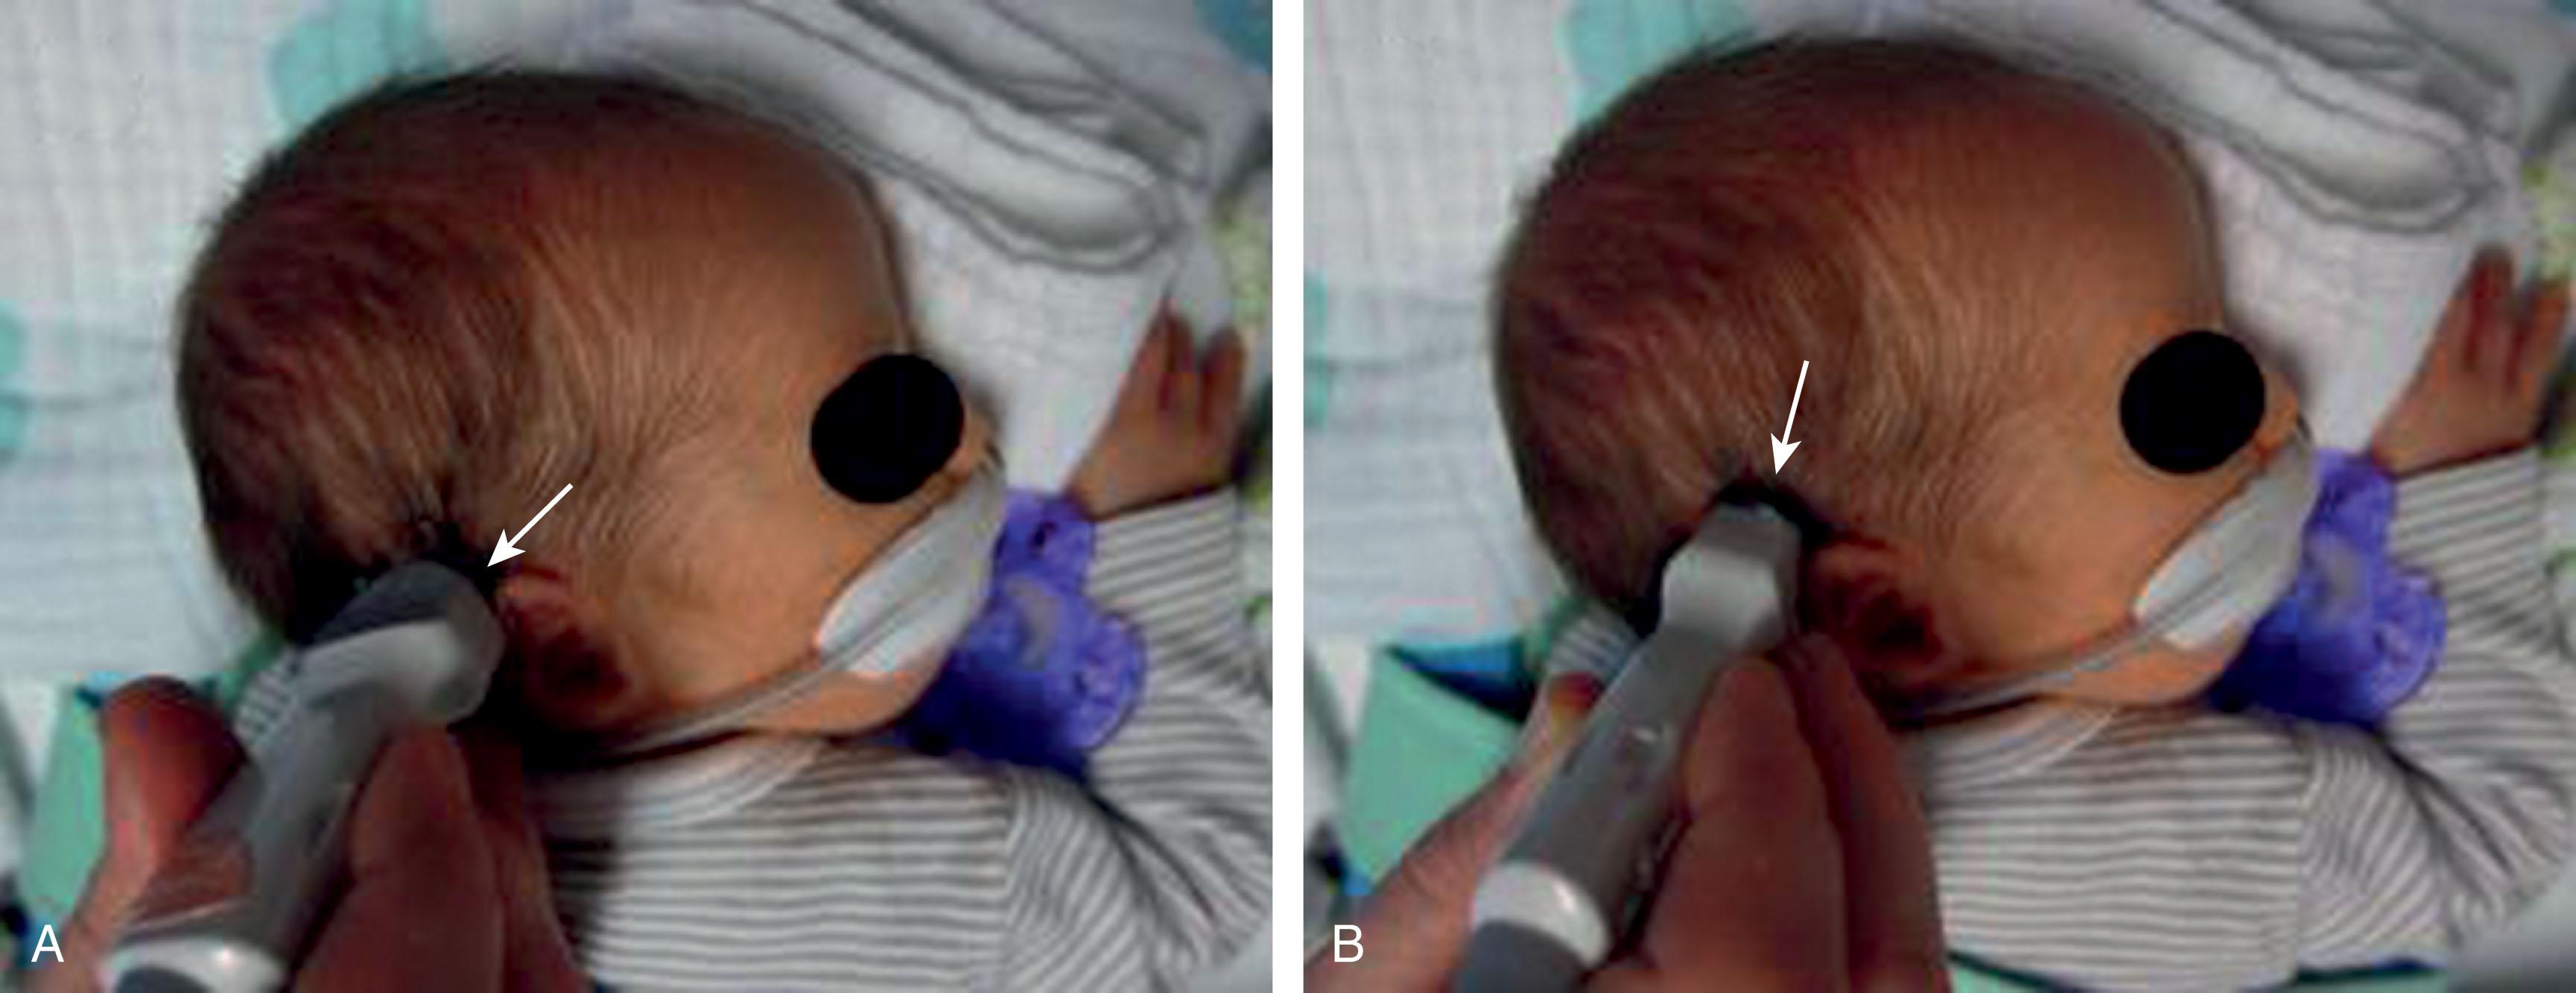 Fig. 27.2, Probe positioning for mastoid fontanel cranial ultrasonography, axial (A) and coronal (B) views.